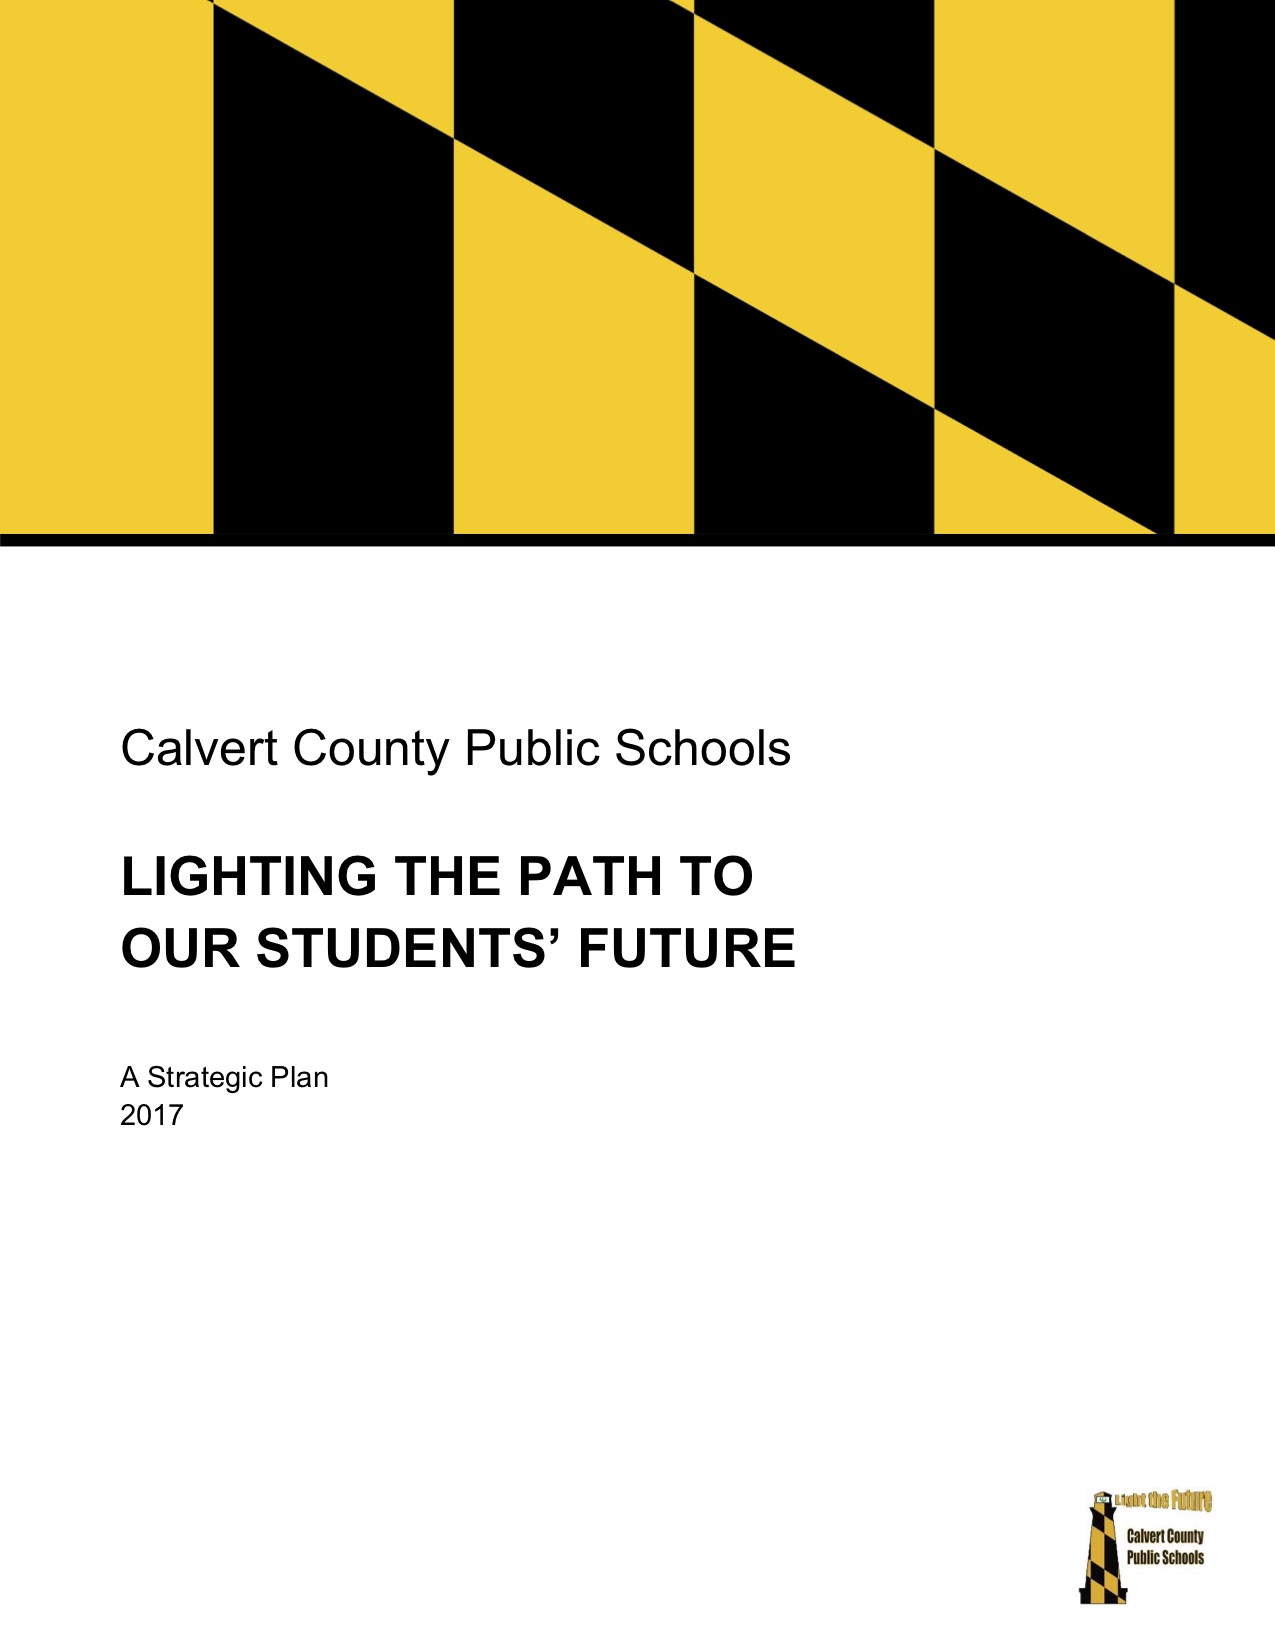 Lighting The Path To Our Students' Future Strategic Plan 2017